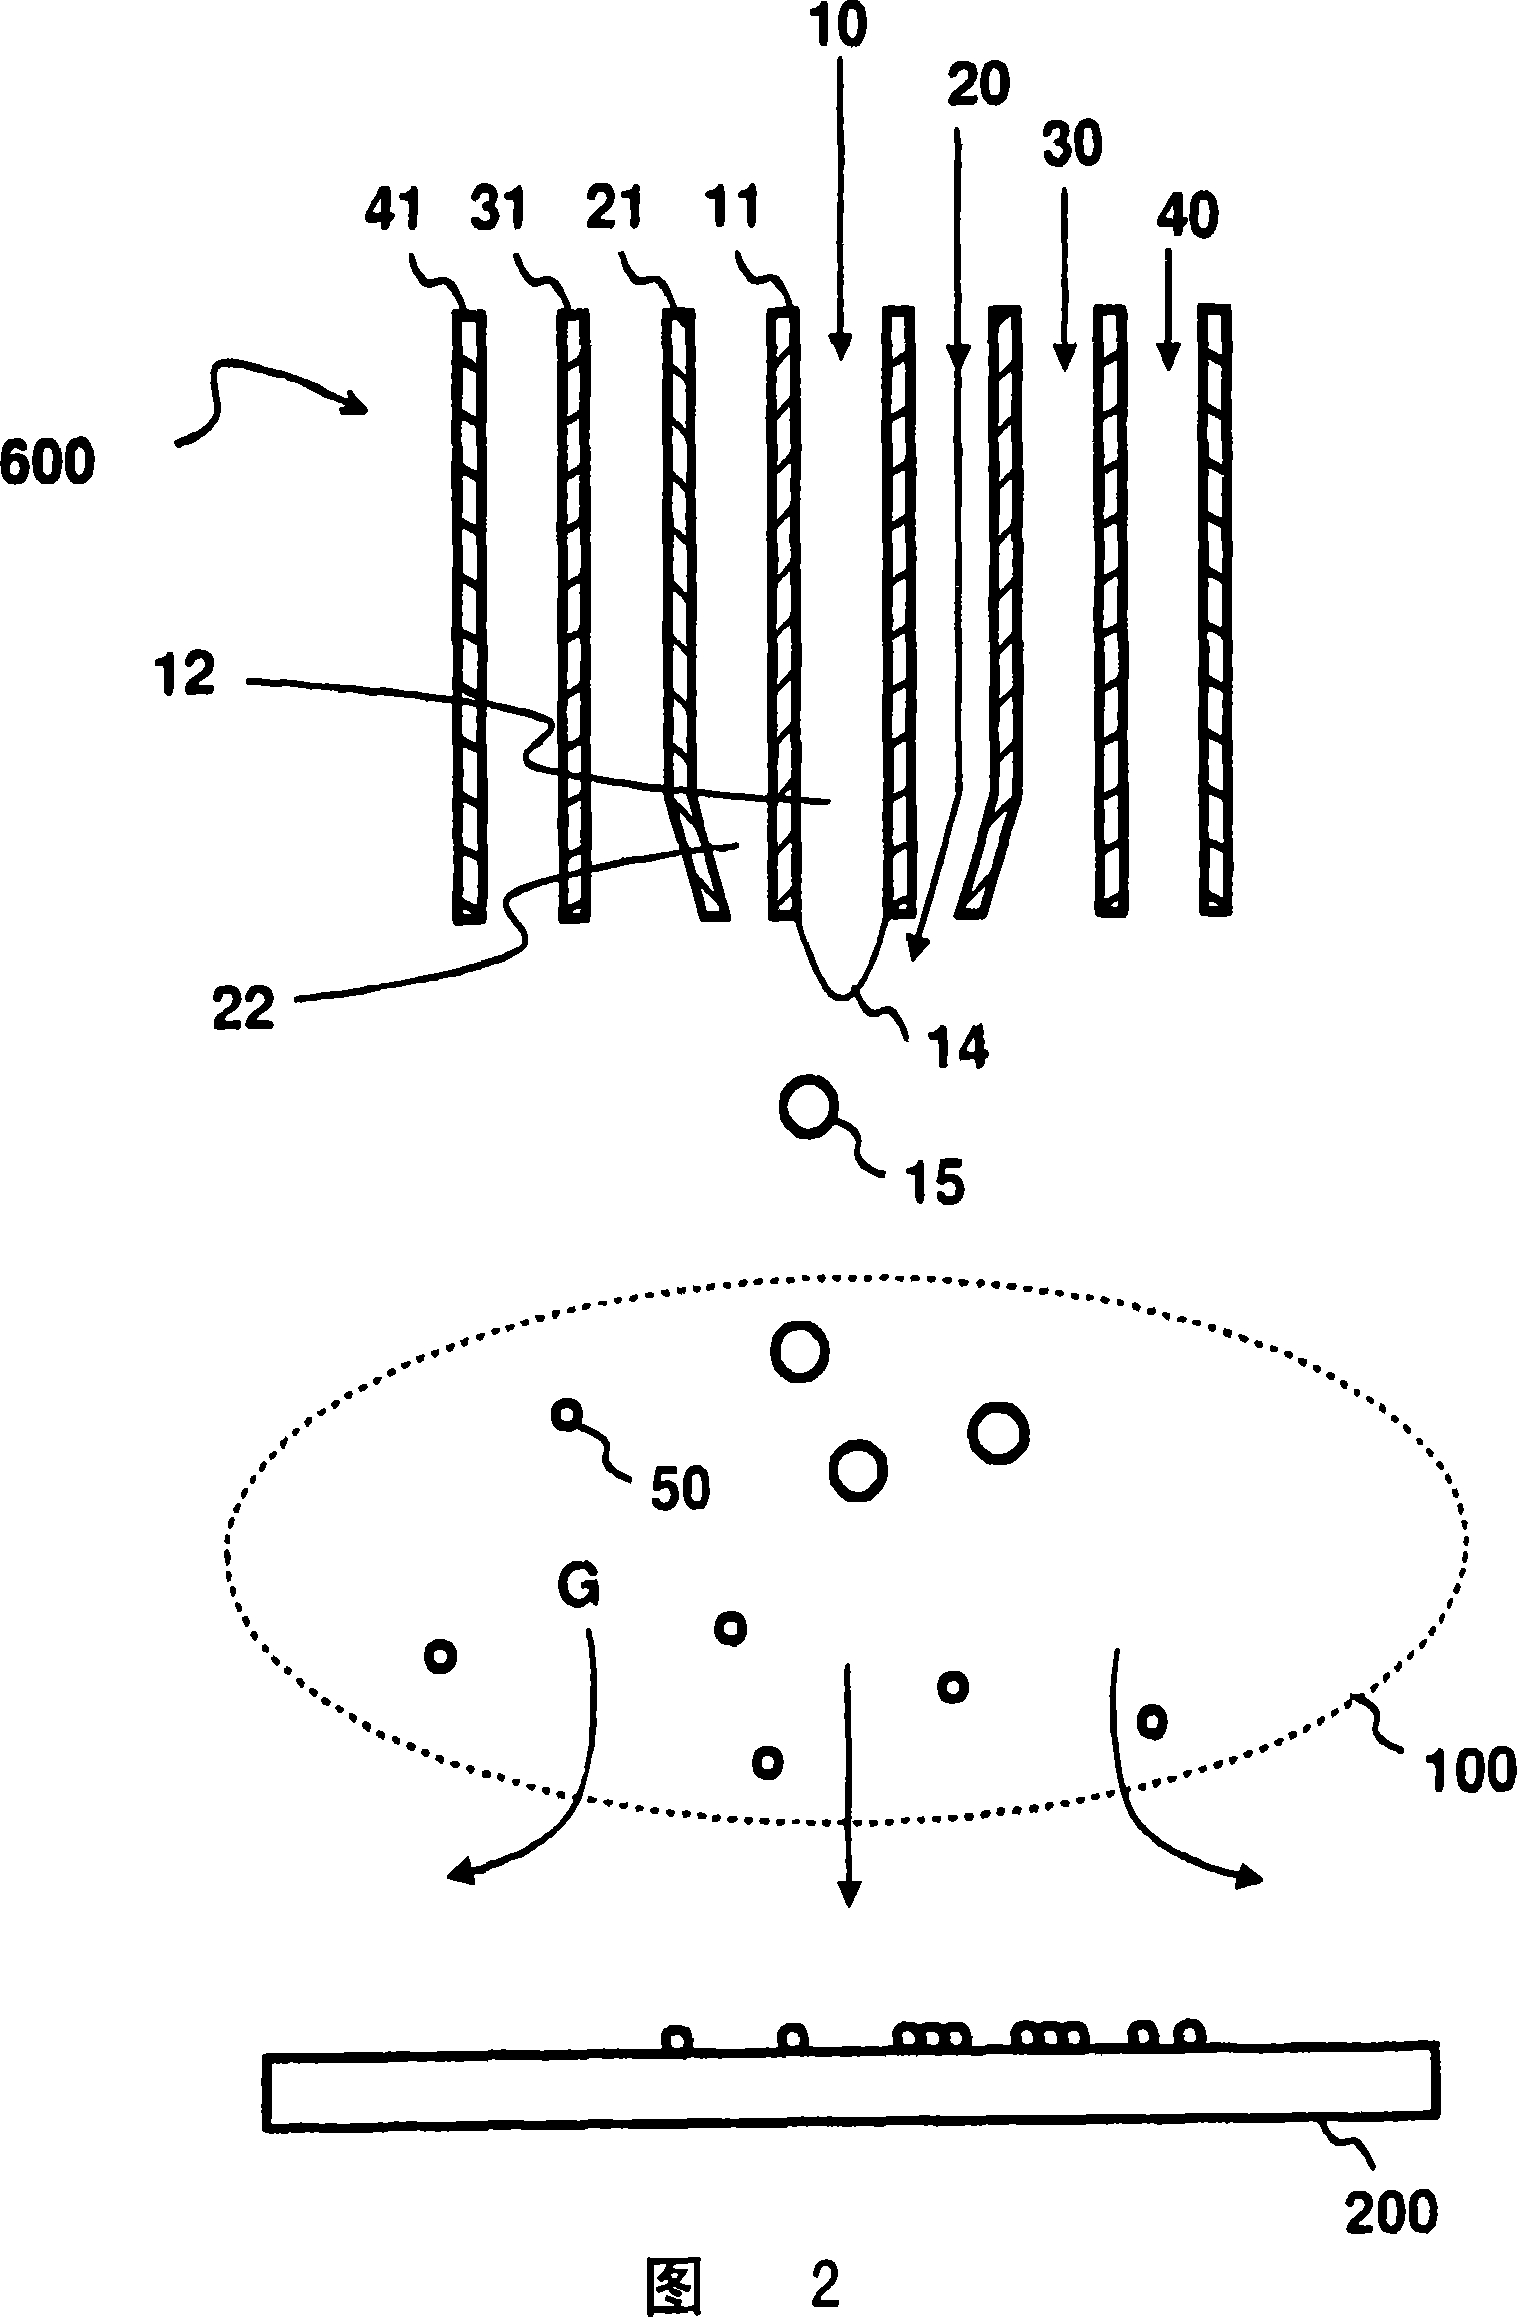 Optical waveguide material as well as method and device for producing it